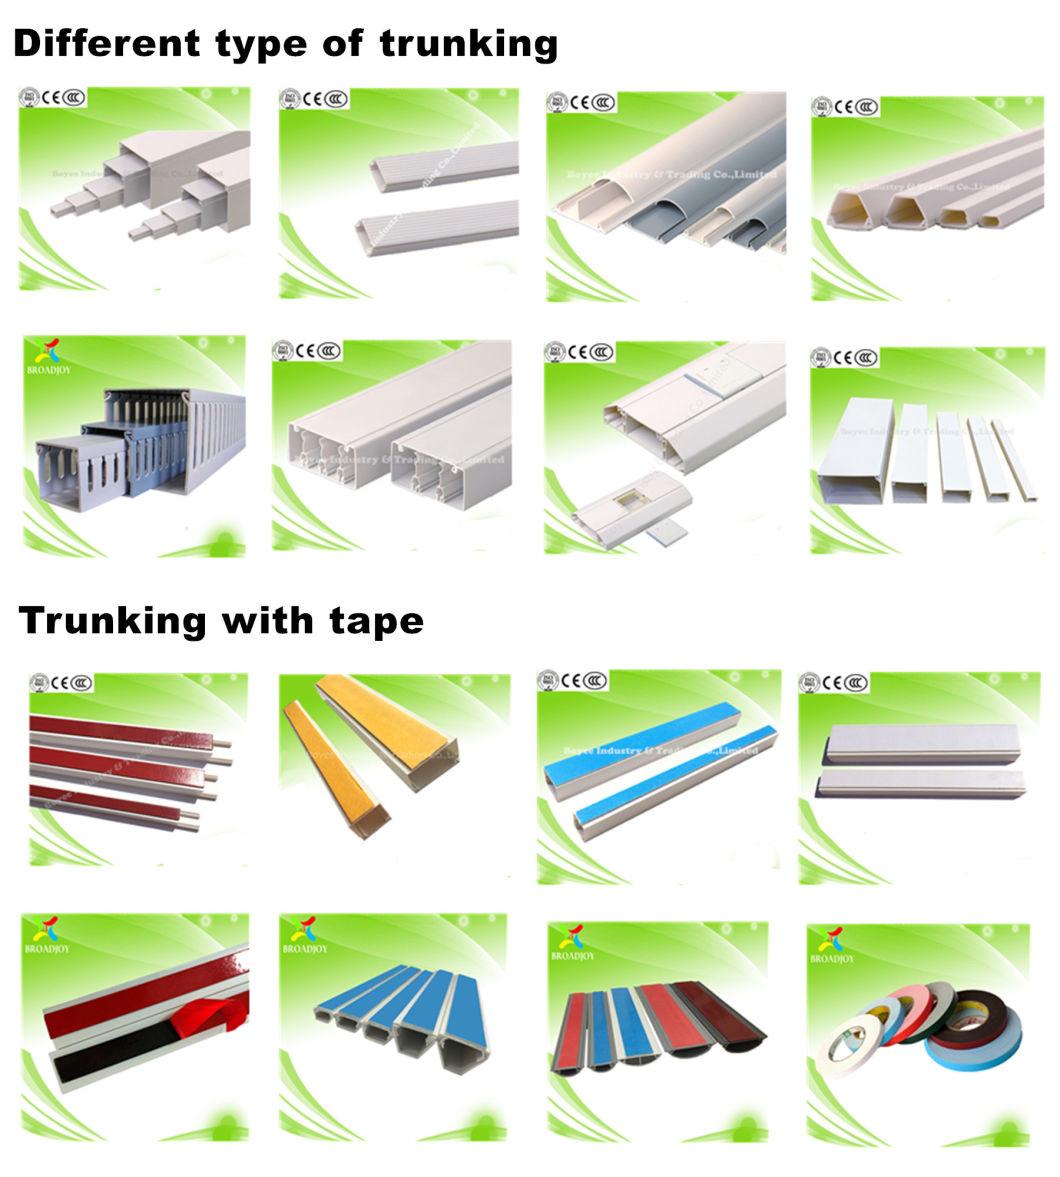 All Sizes Durable and Attractive Trunking with Self-Adhesive Sticker PVC Skirting Dado Trunking